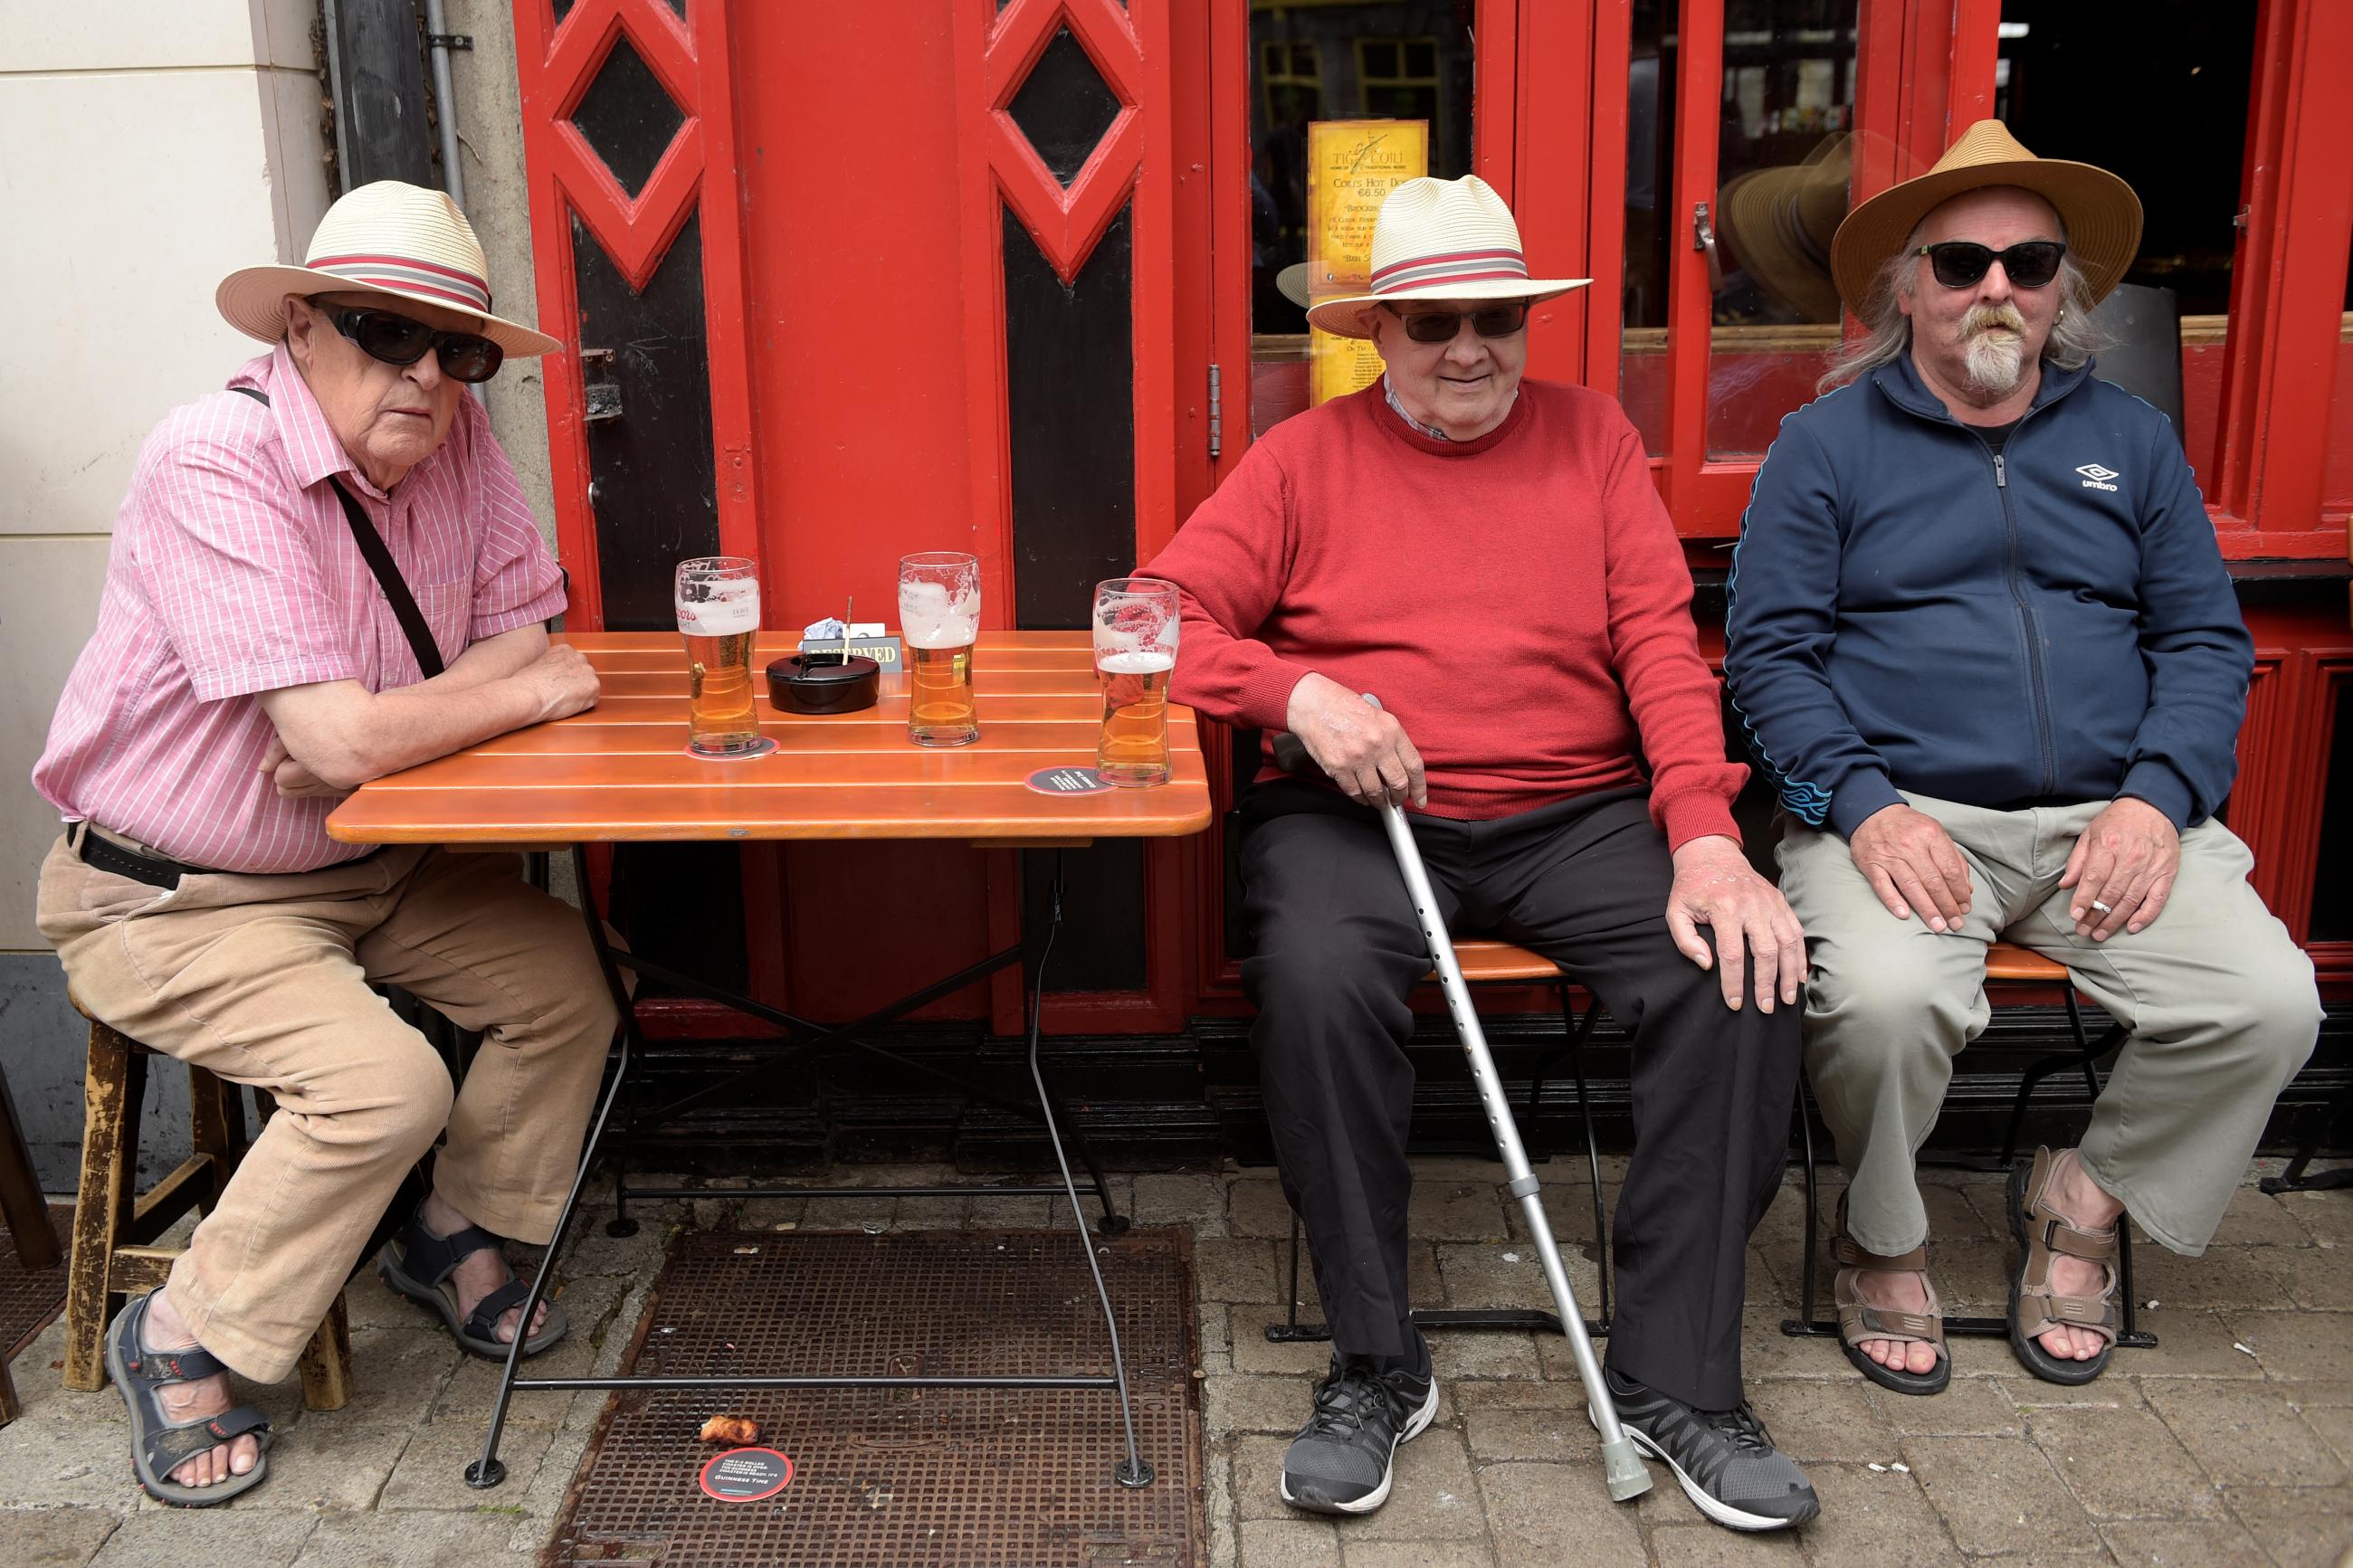 As COVID-19 restrictions eased, people gathered to drink at outdoor restaurants and bars in Galway, Ireland, on June 7, 2021.